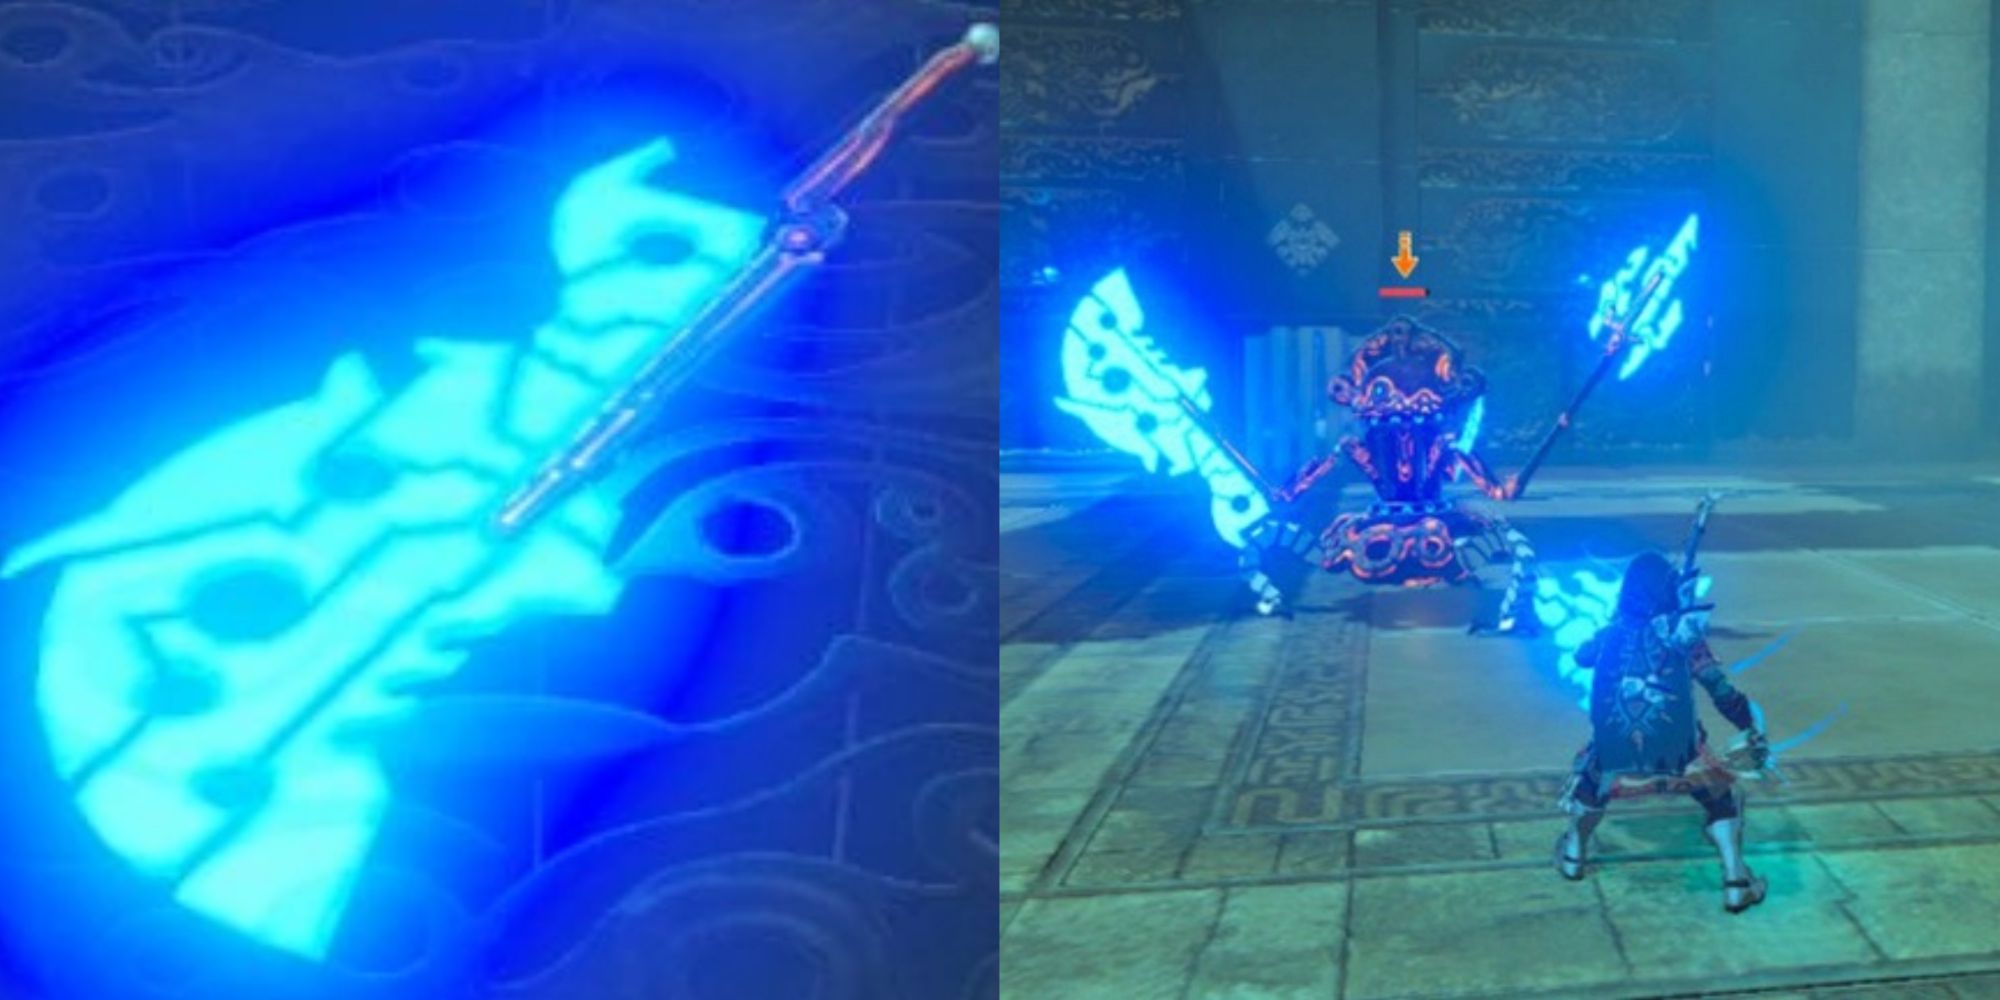 Split image screenshots of the Ancient Battle Axe++ on the ground and Link battling a Guardian holding the Ancient Battle Axe++.